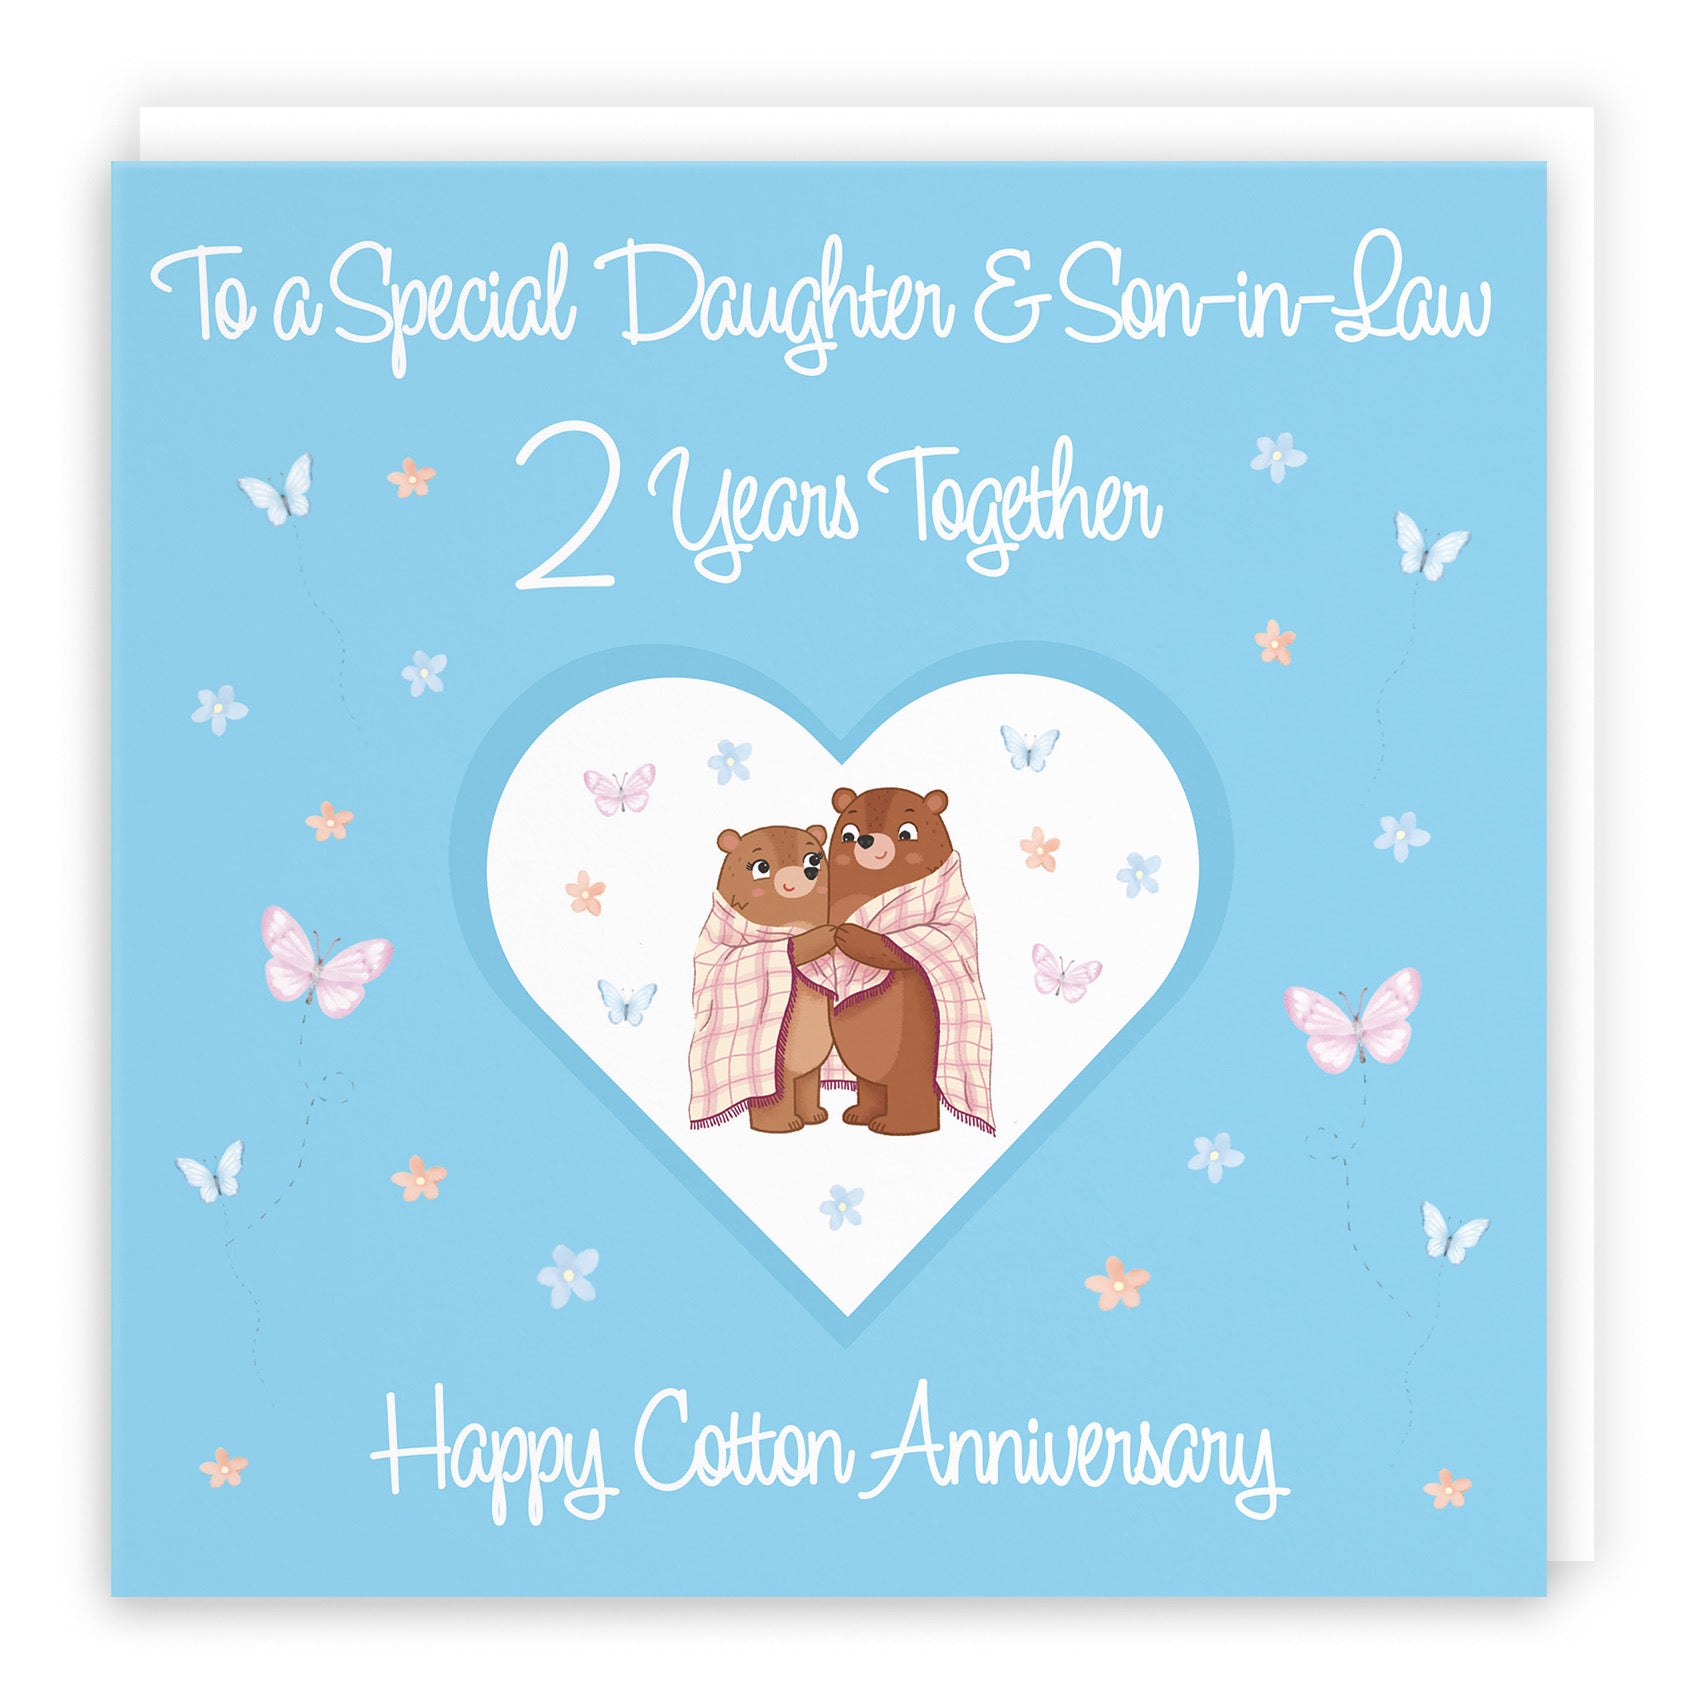 Large Daughter & Son-in-Law 2nd Anniversary Card Romantic Meadows - Default Title (B0CXY5HXP8)